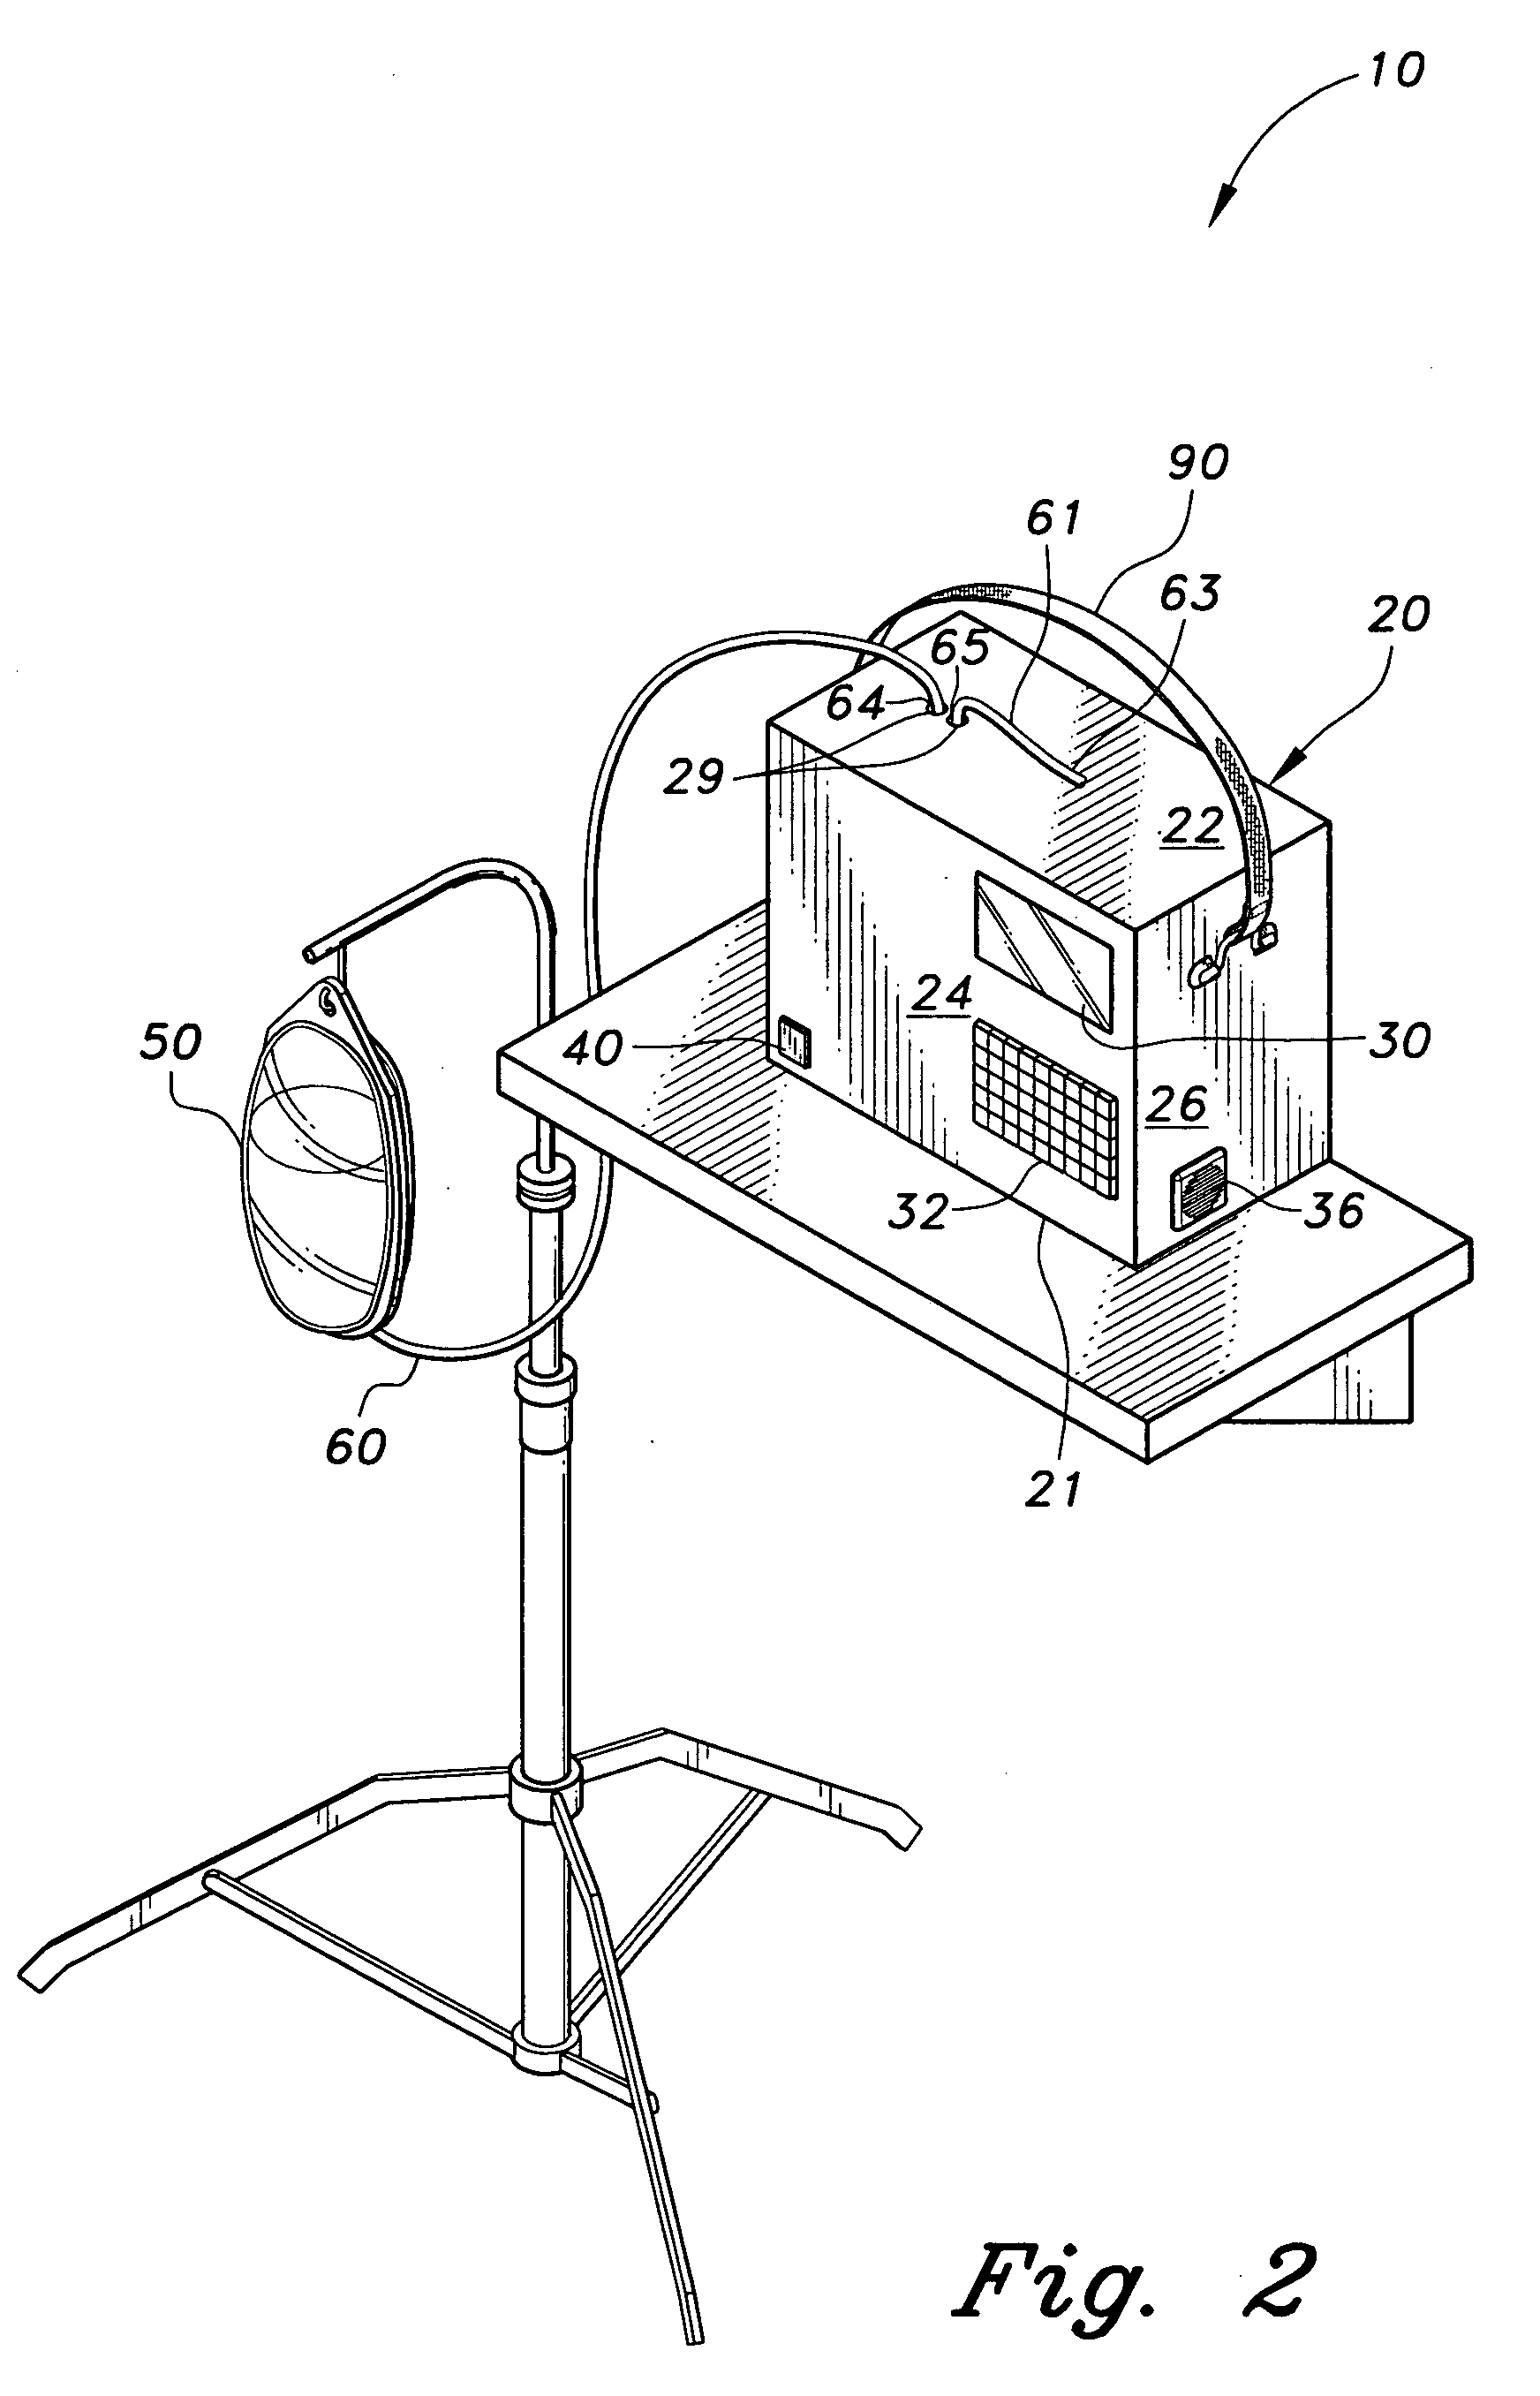 Continuous safe suction device